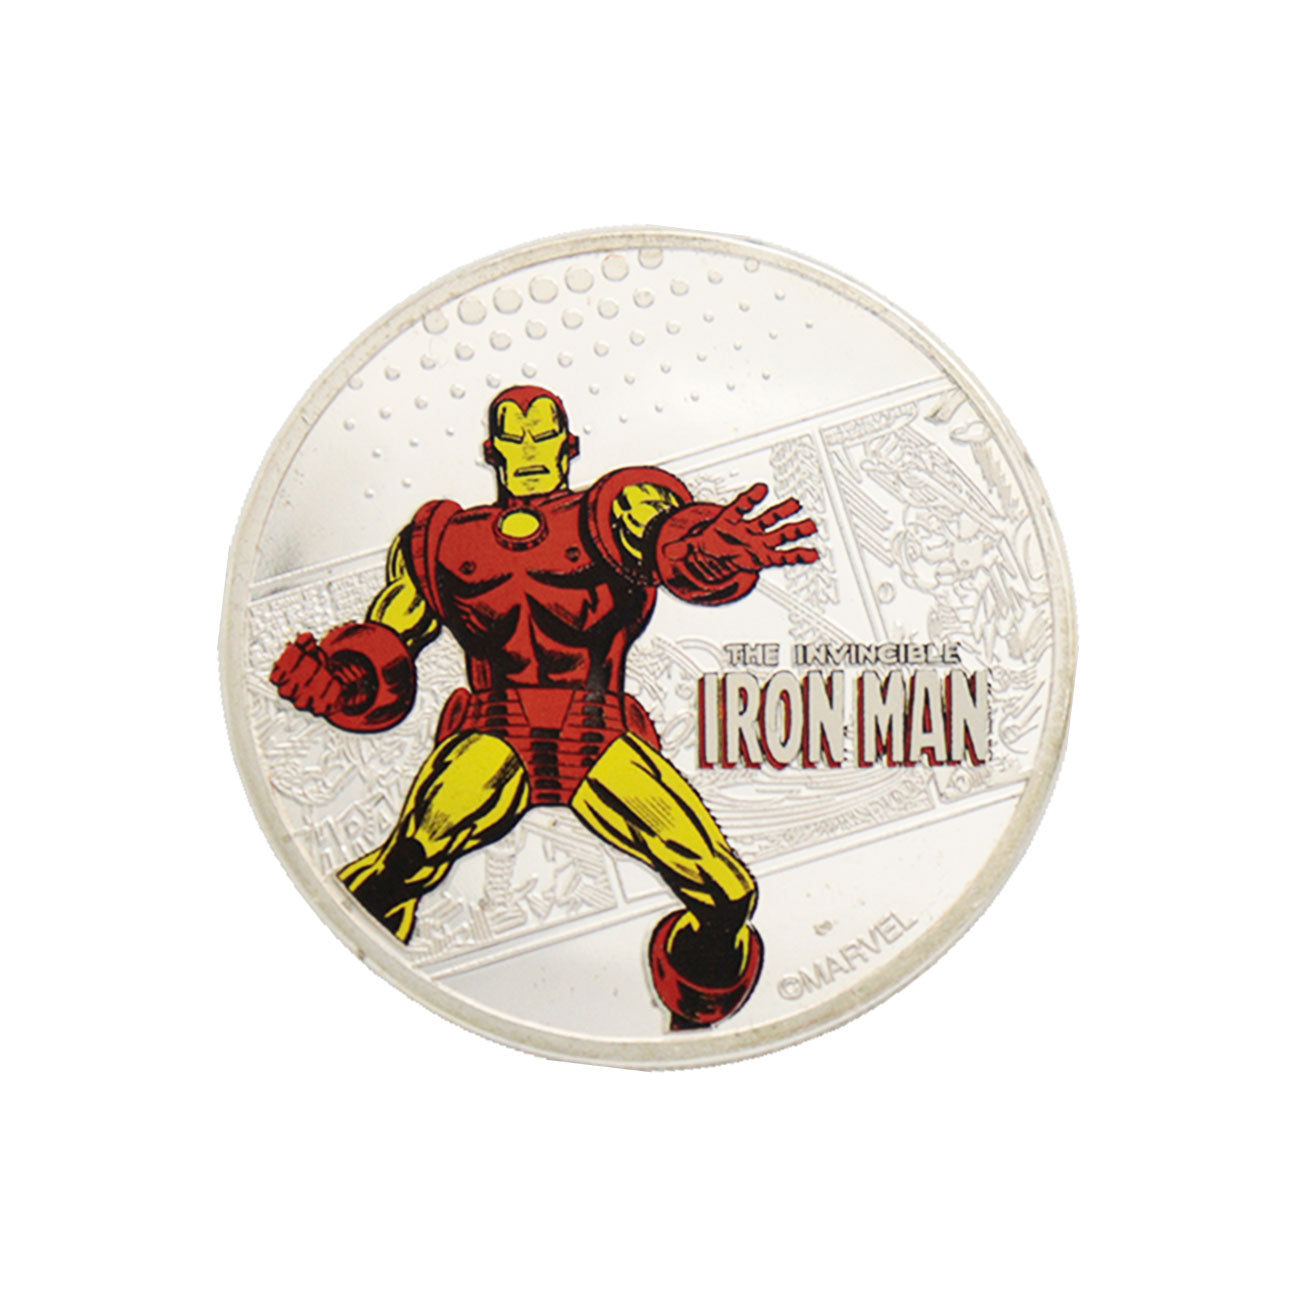 Marvel Limited Edition .999 Silver Plated Ironman Collectible Coin